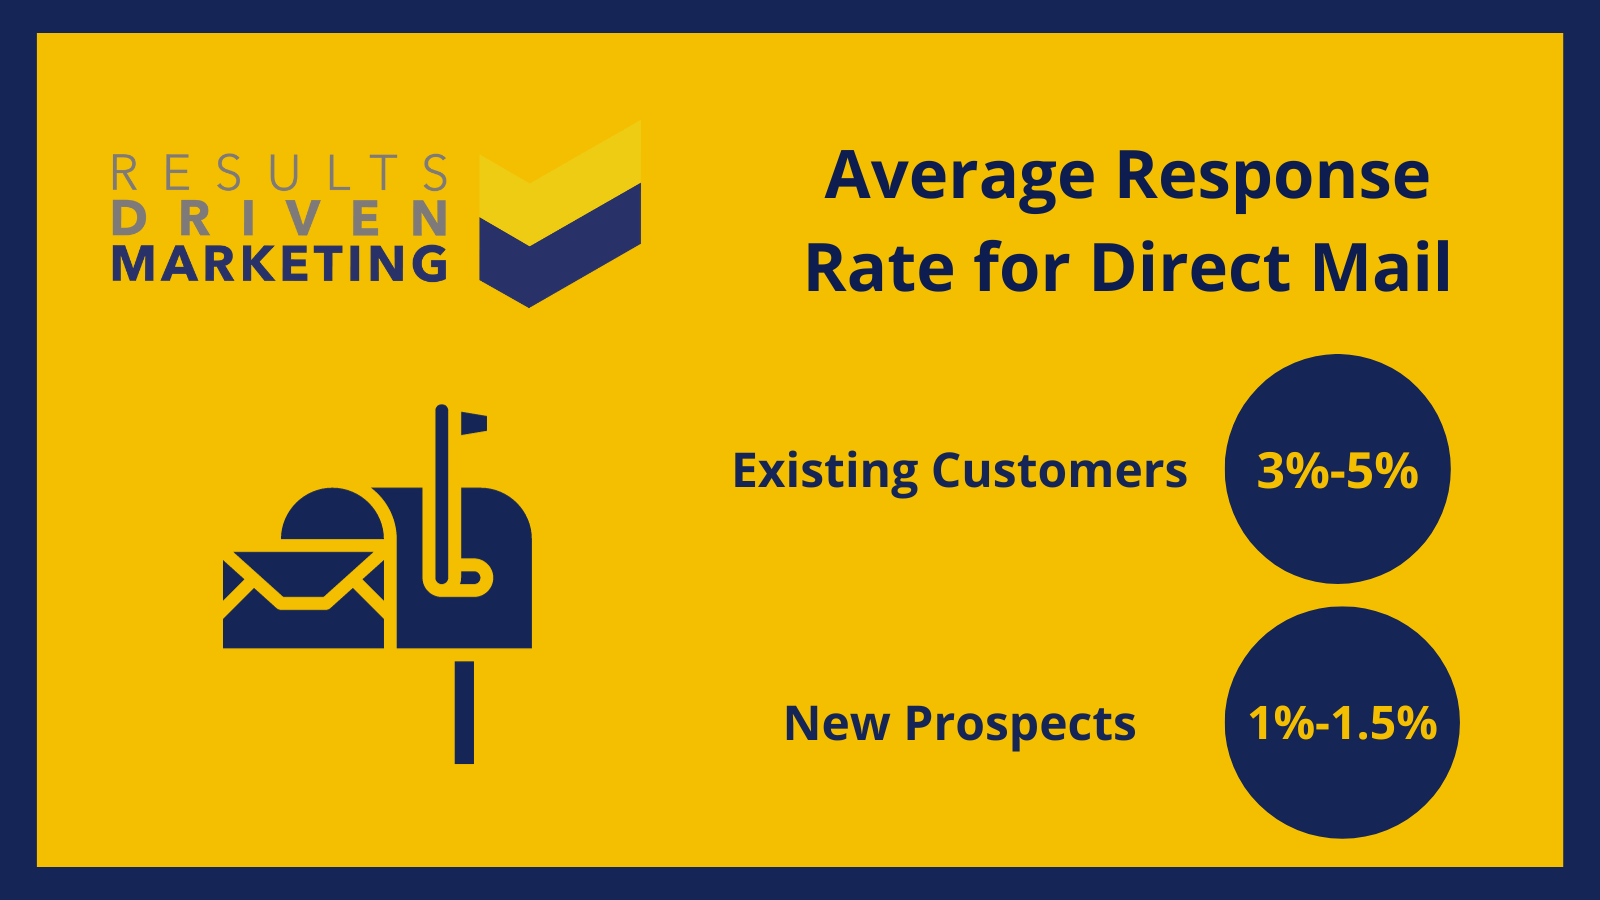 What is the average response rate for direct mail?